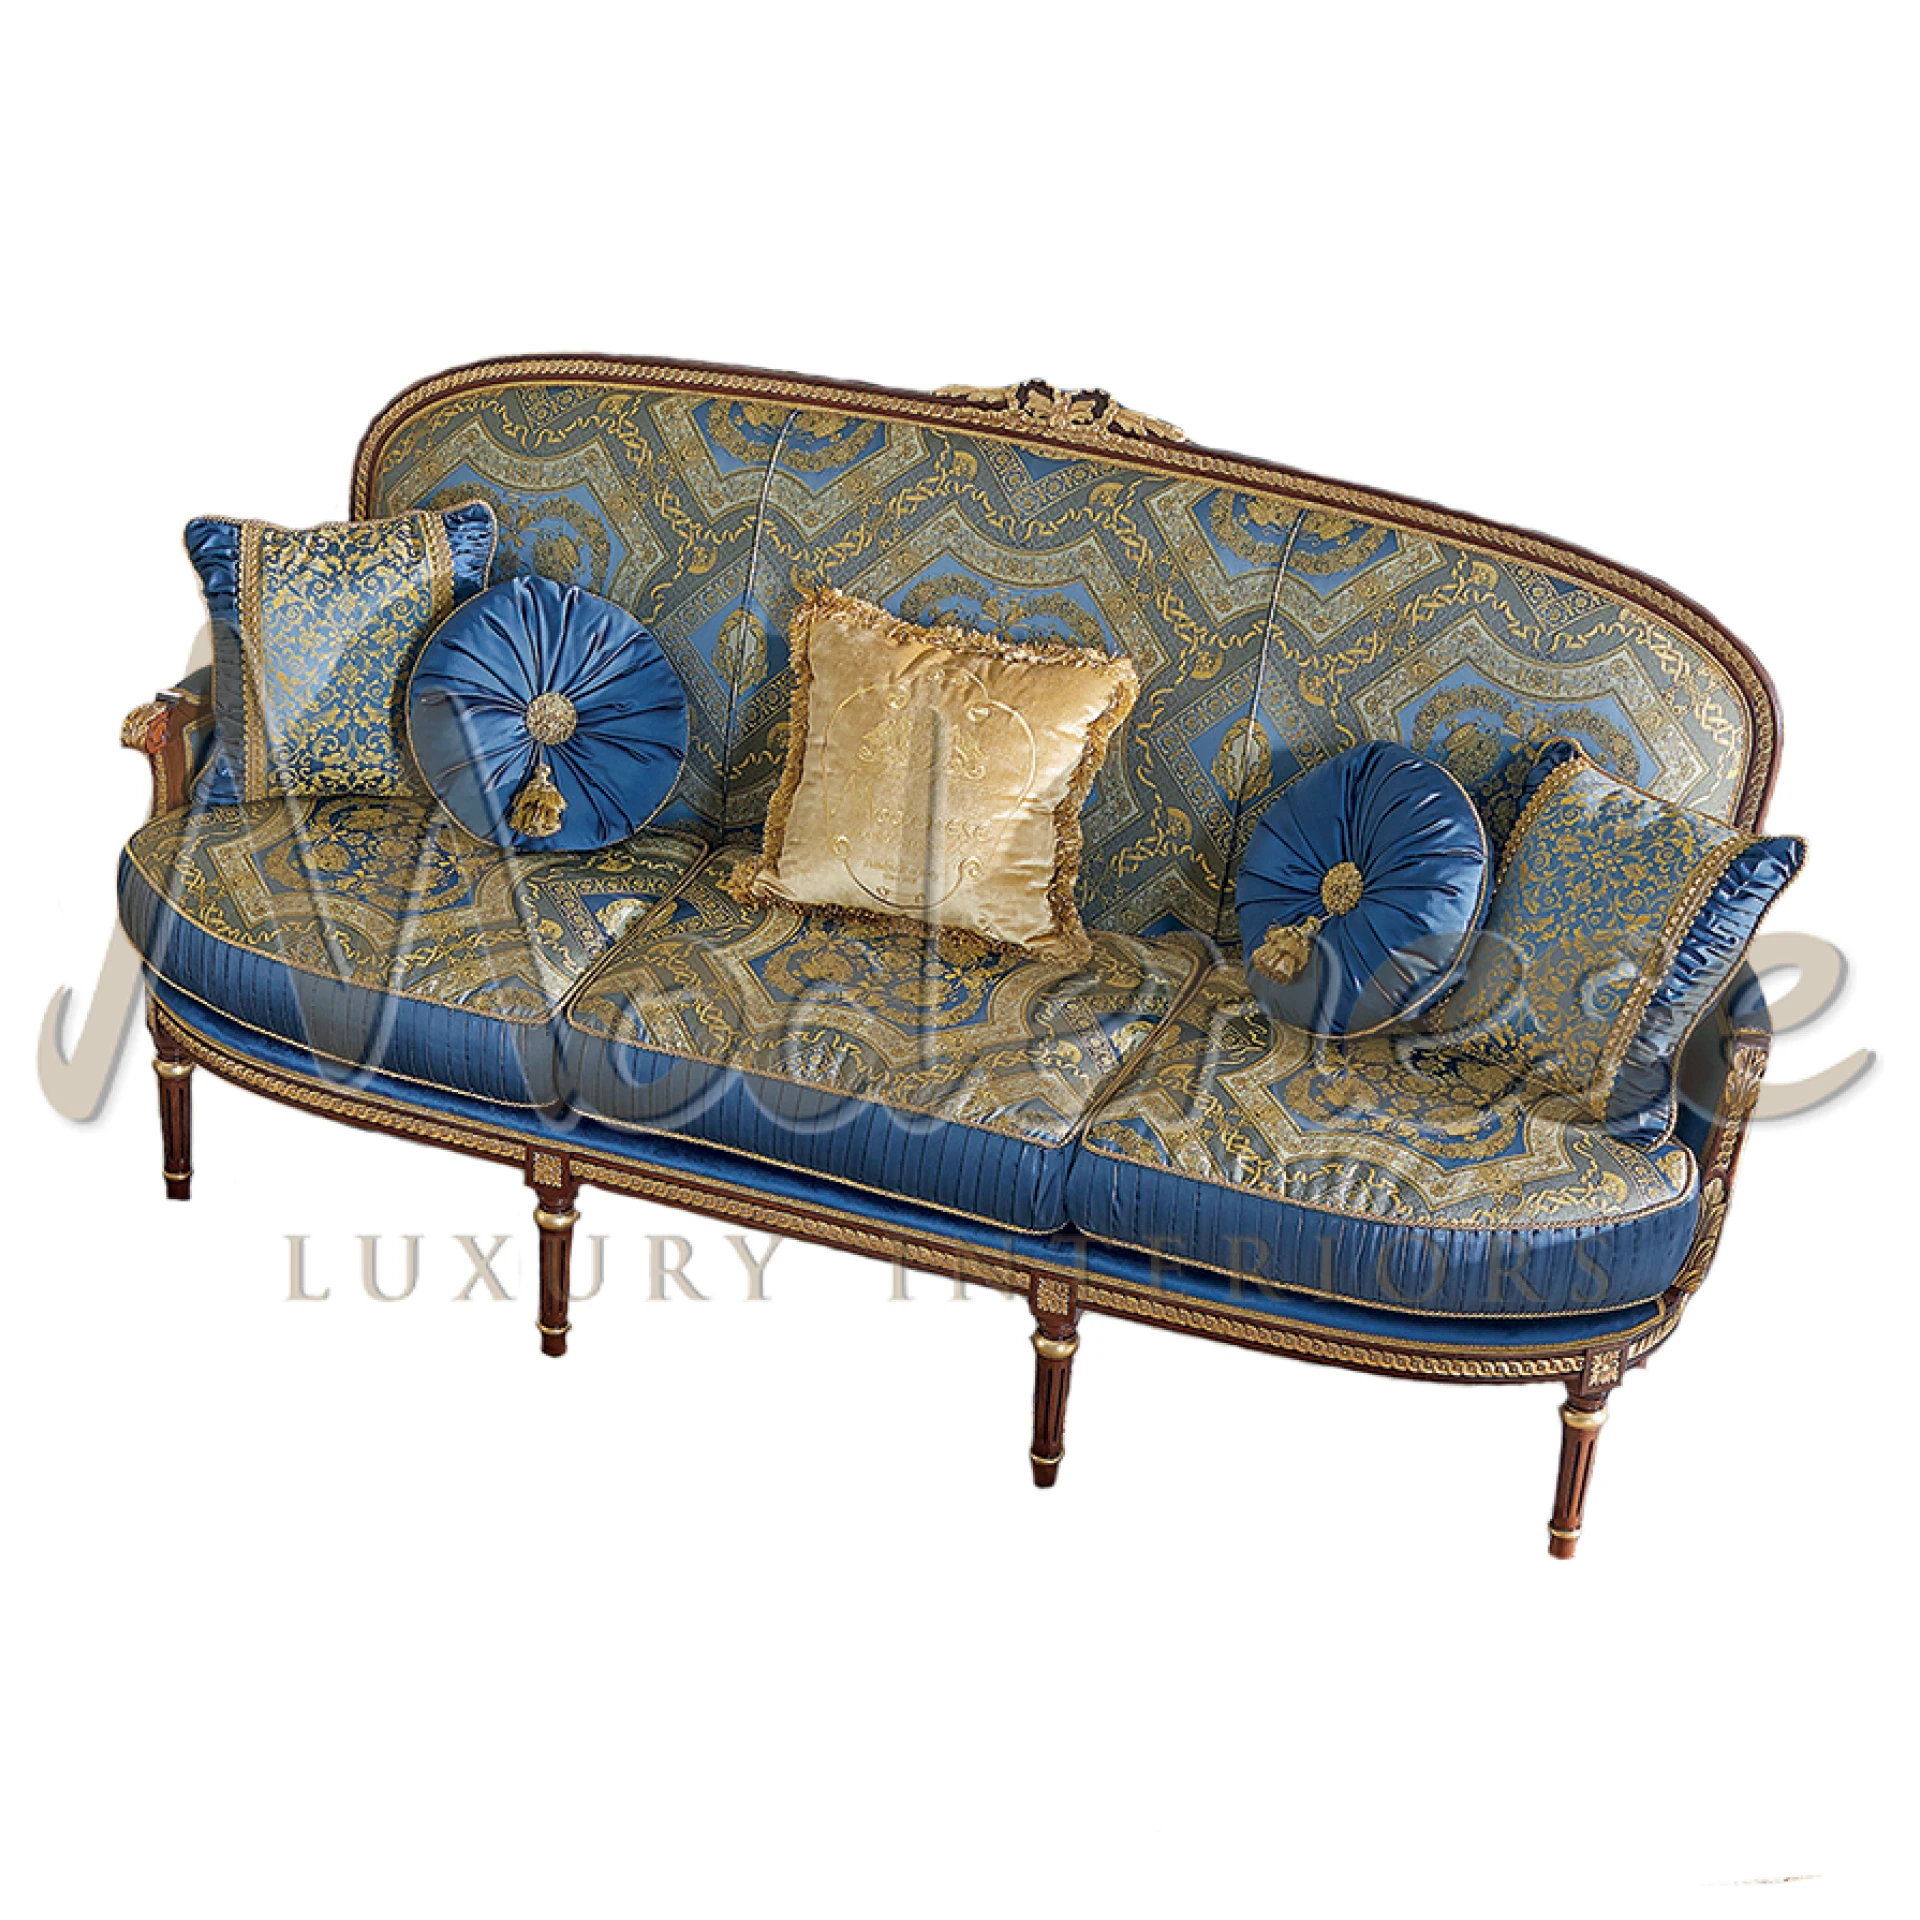 Classic Refined Venetian Sofa with exquisite carvings, embodying luxury and romantic decor aesthetics by Modenese Interiors